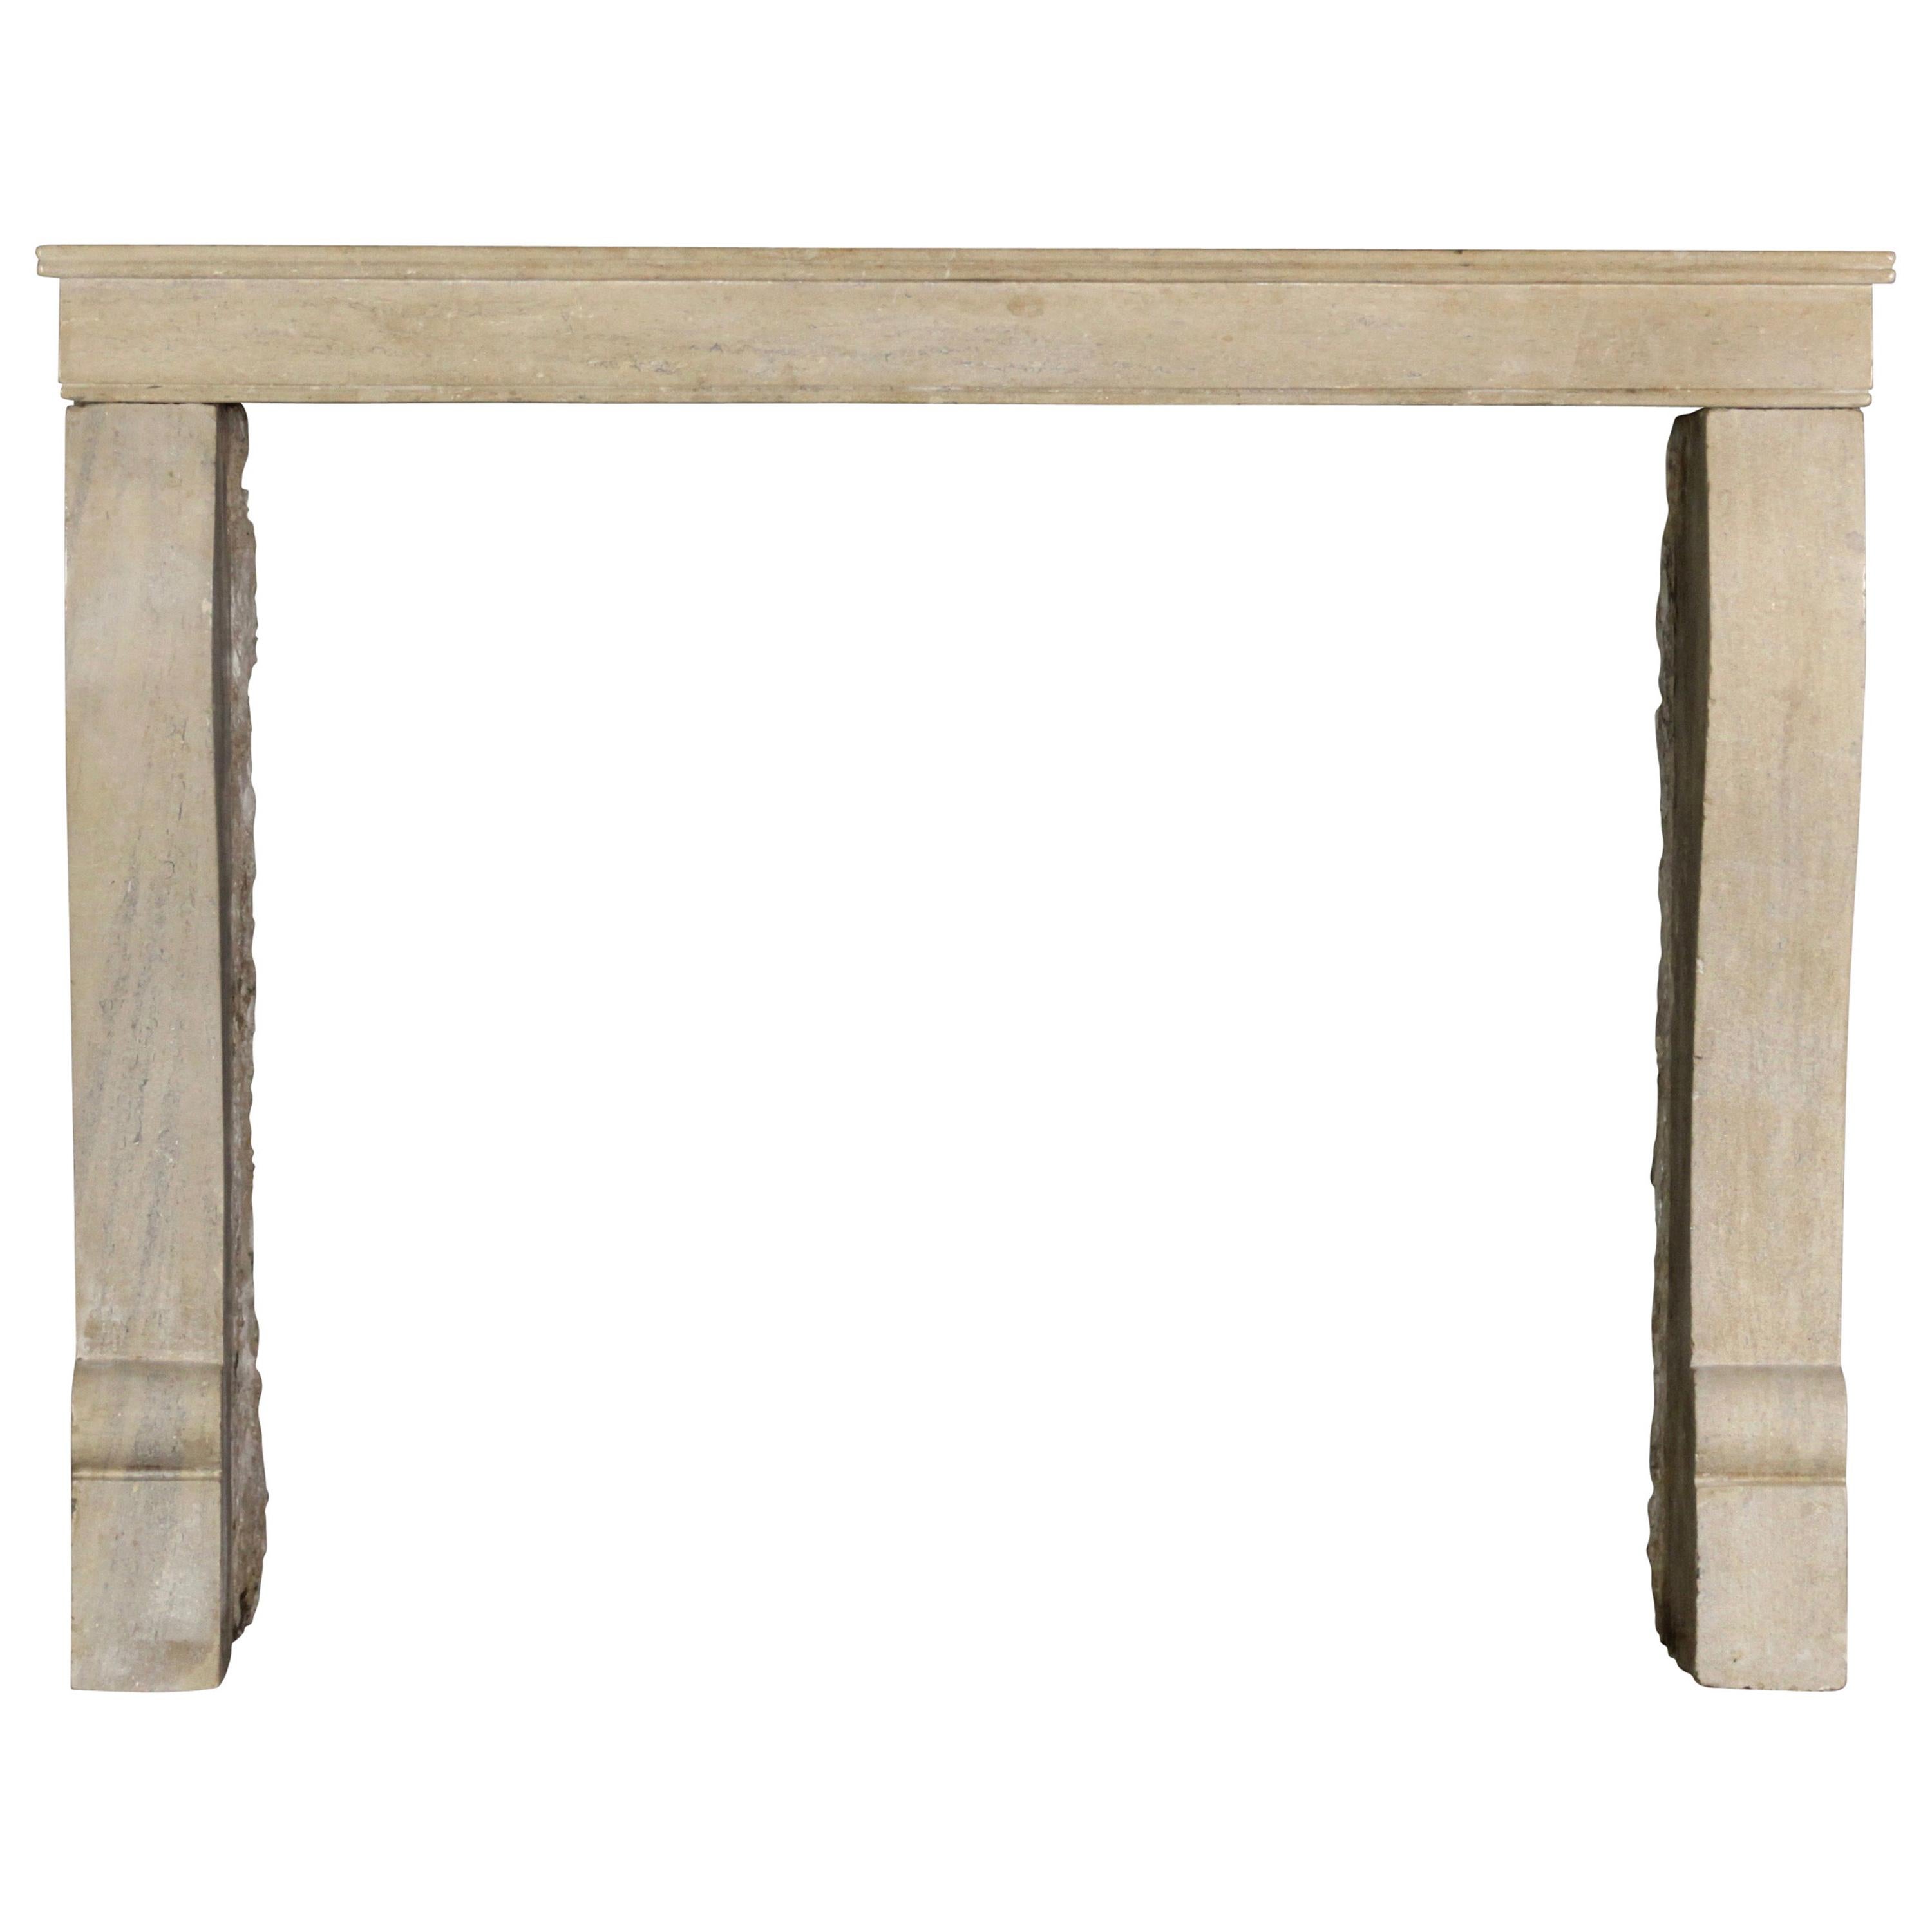 Small French Limestone Antique Fireplace Surround for Eclectic Chic Interior